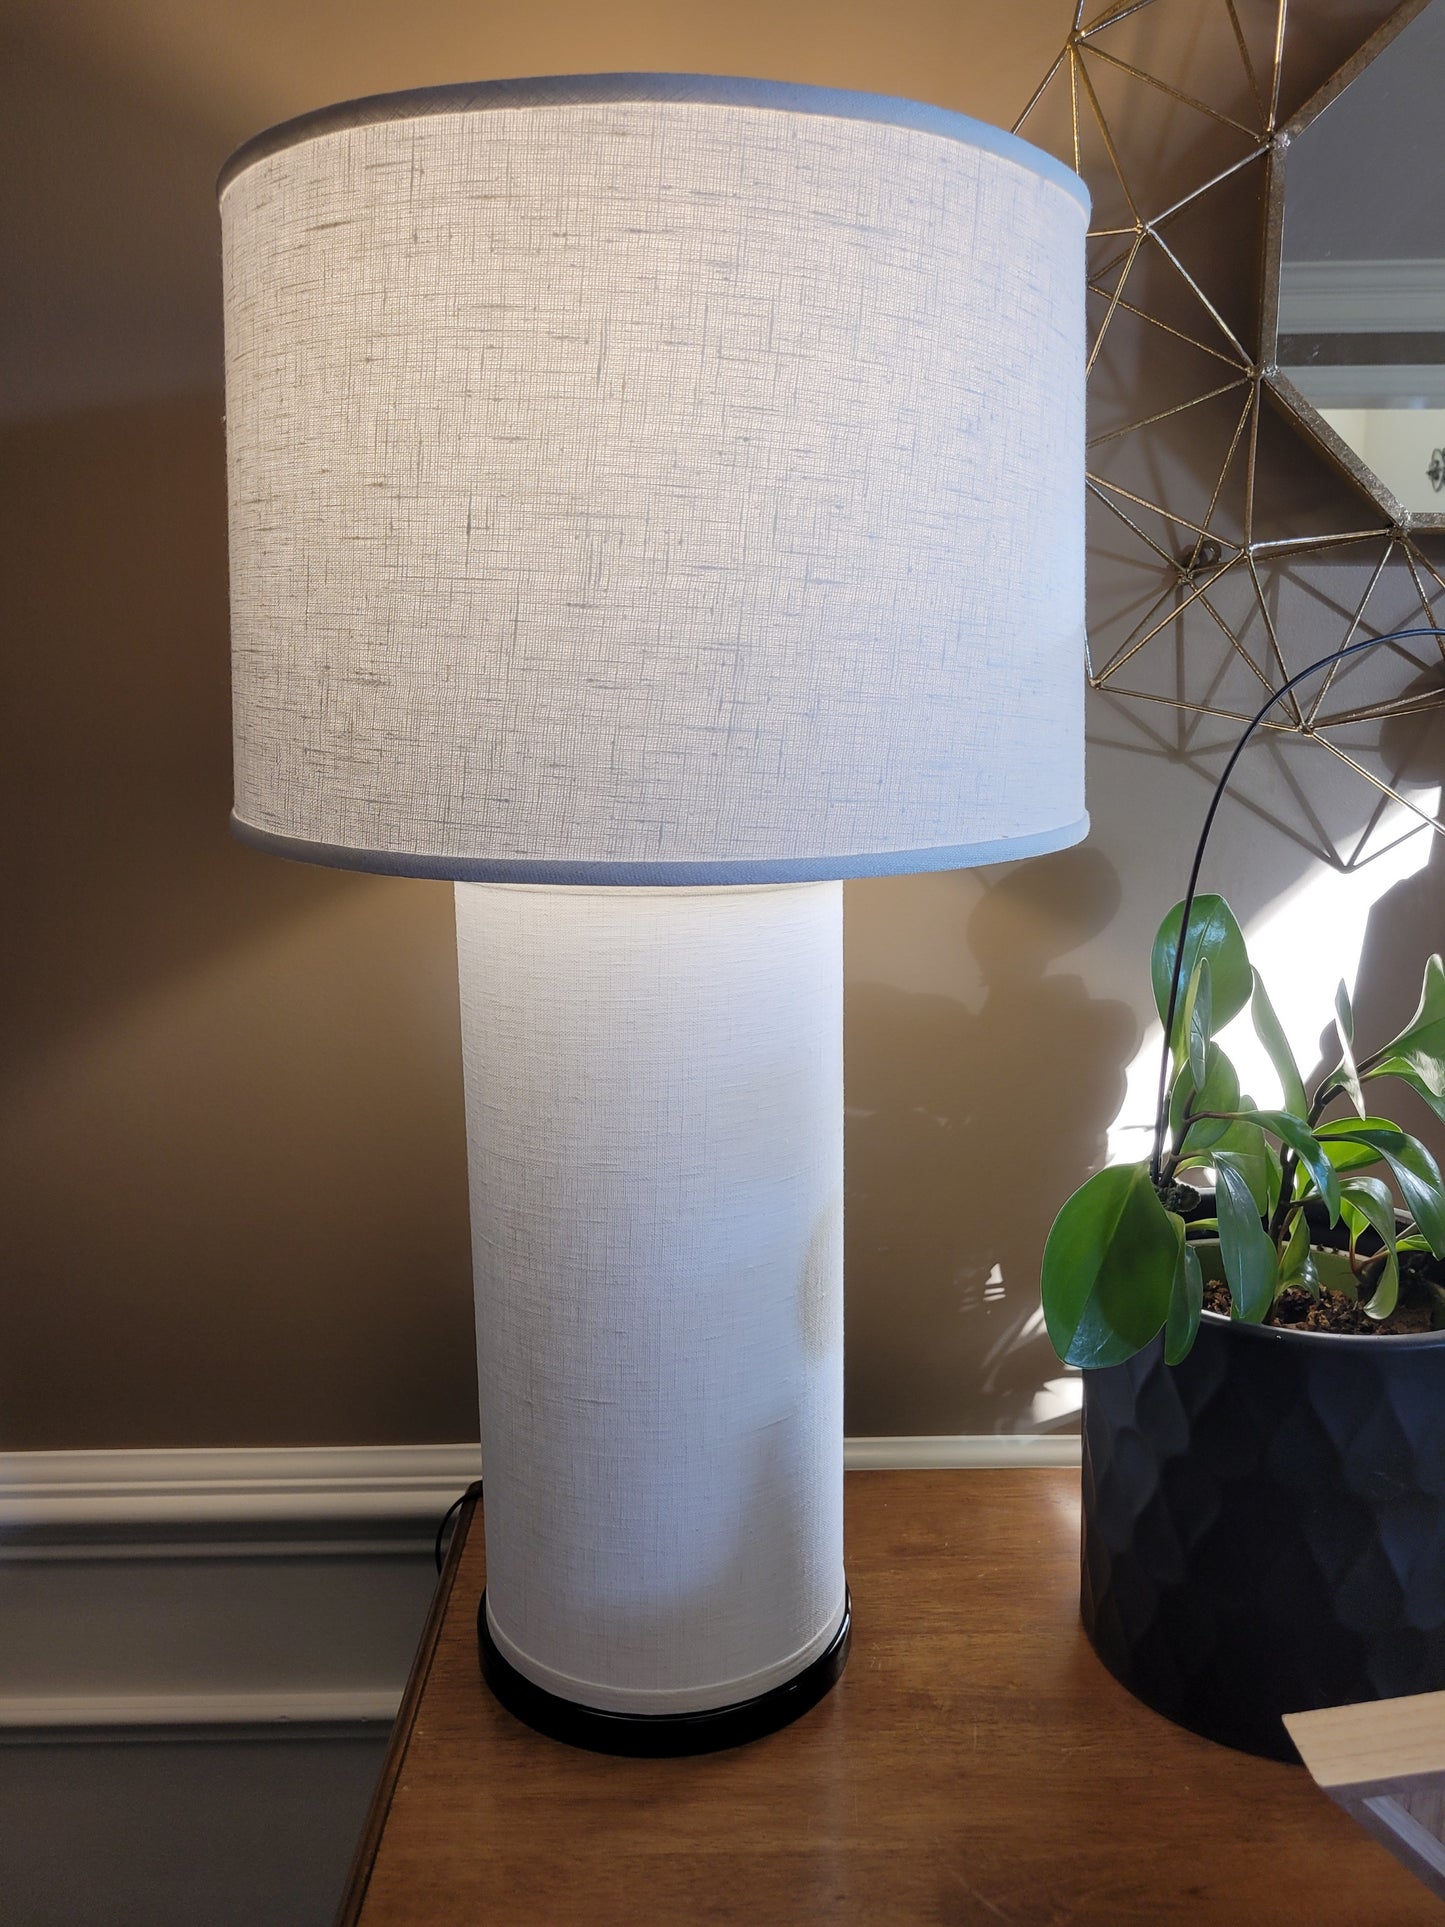 POP Table Lamp with White Linen Drum Lamp Shade